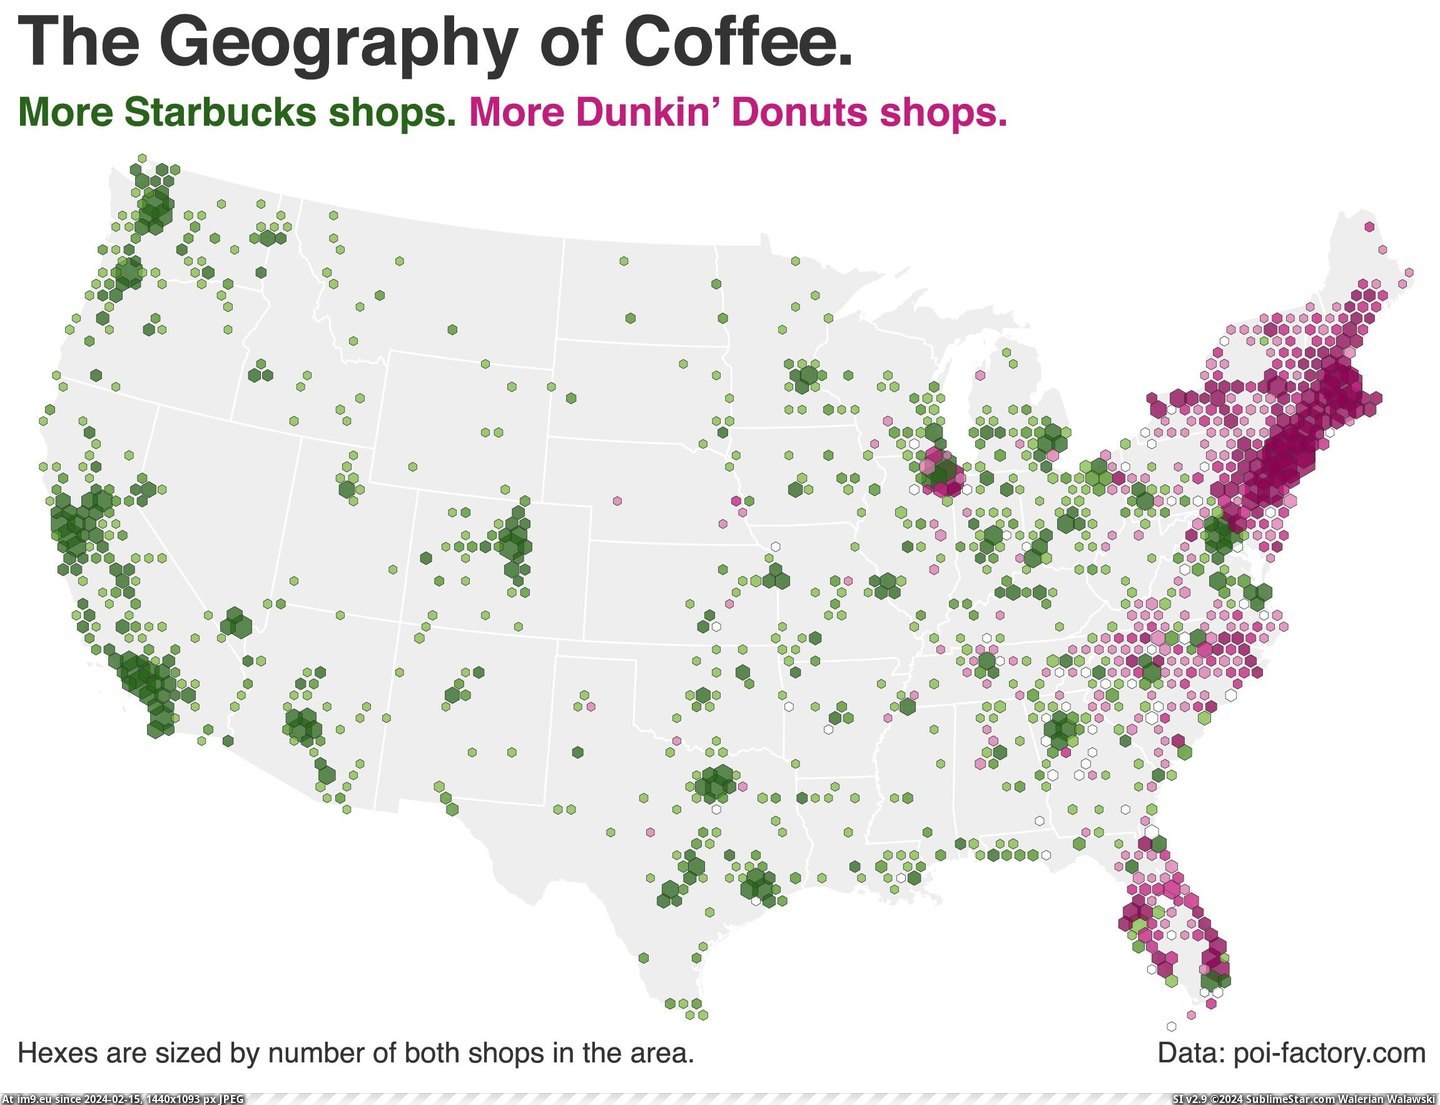 #Coffee #Shop #Geography #Dunkin #Donuts #Starbucks [Dataisbeautiful] Coffee shop geography: Starbucks vs. Dunkin' Donuts Pic. (Image of album My r/DATAISBEAUTIFUL favs))